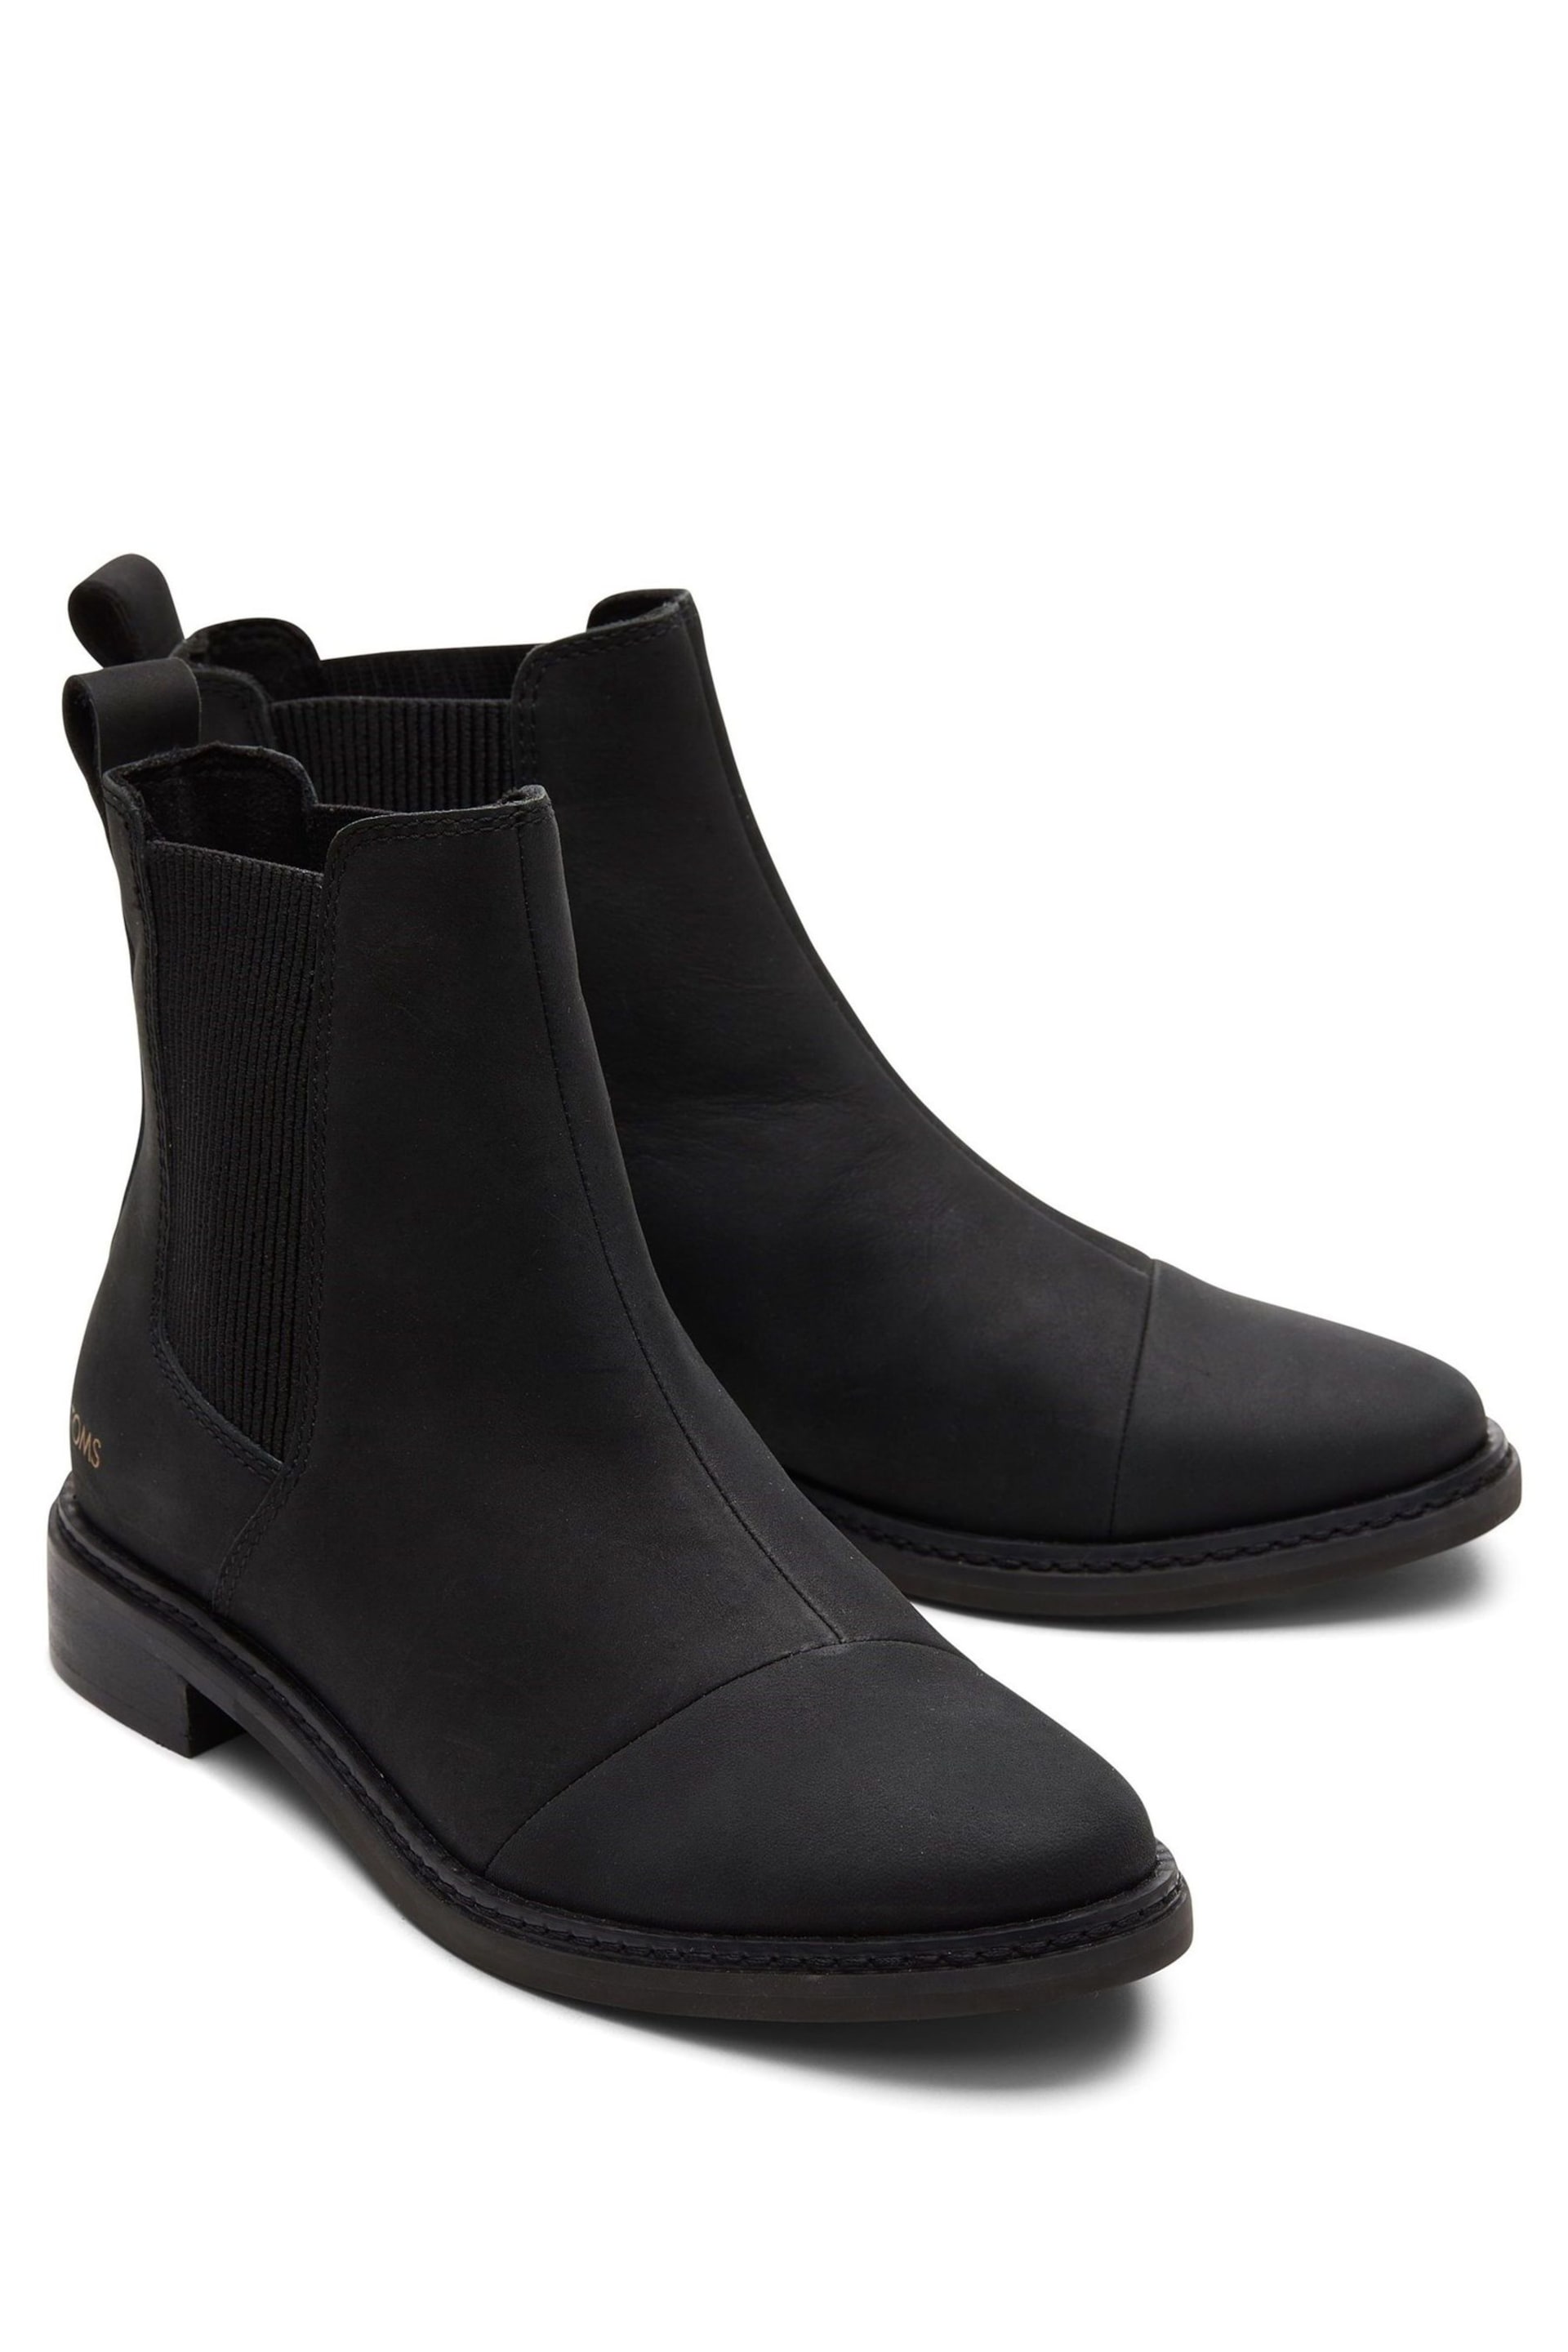 TOMS Charlie Black Leather Chelsea Boots - Image 9 of 11